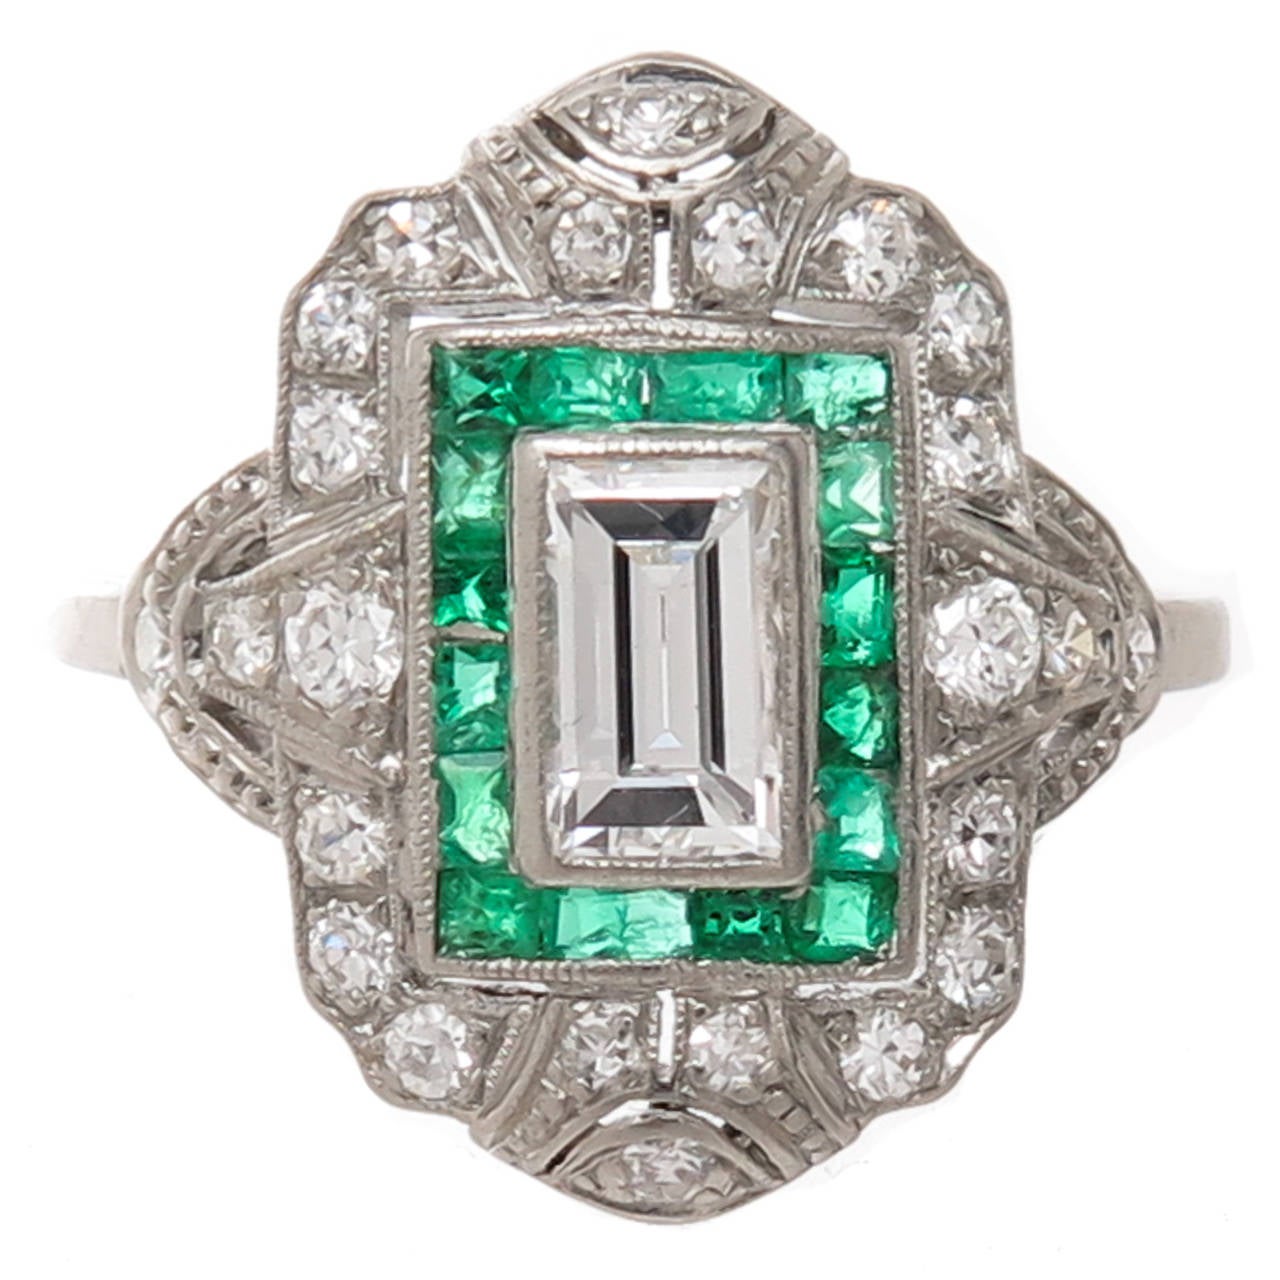 Circa early 1930s Platinum, Diamond and Emerald Engagement Ring, centrally set with a stepped cut, Emerald Cut Diamond that is 3/4 carat and is H in Color and VS in Clarity, surrounded by Emerald cut Emeralds of Fine Color. The ring is further set